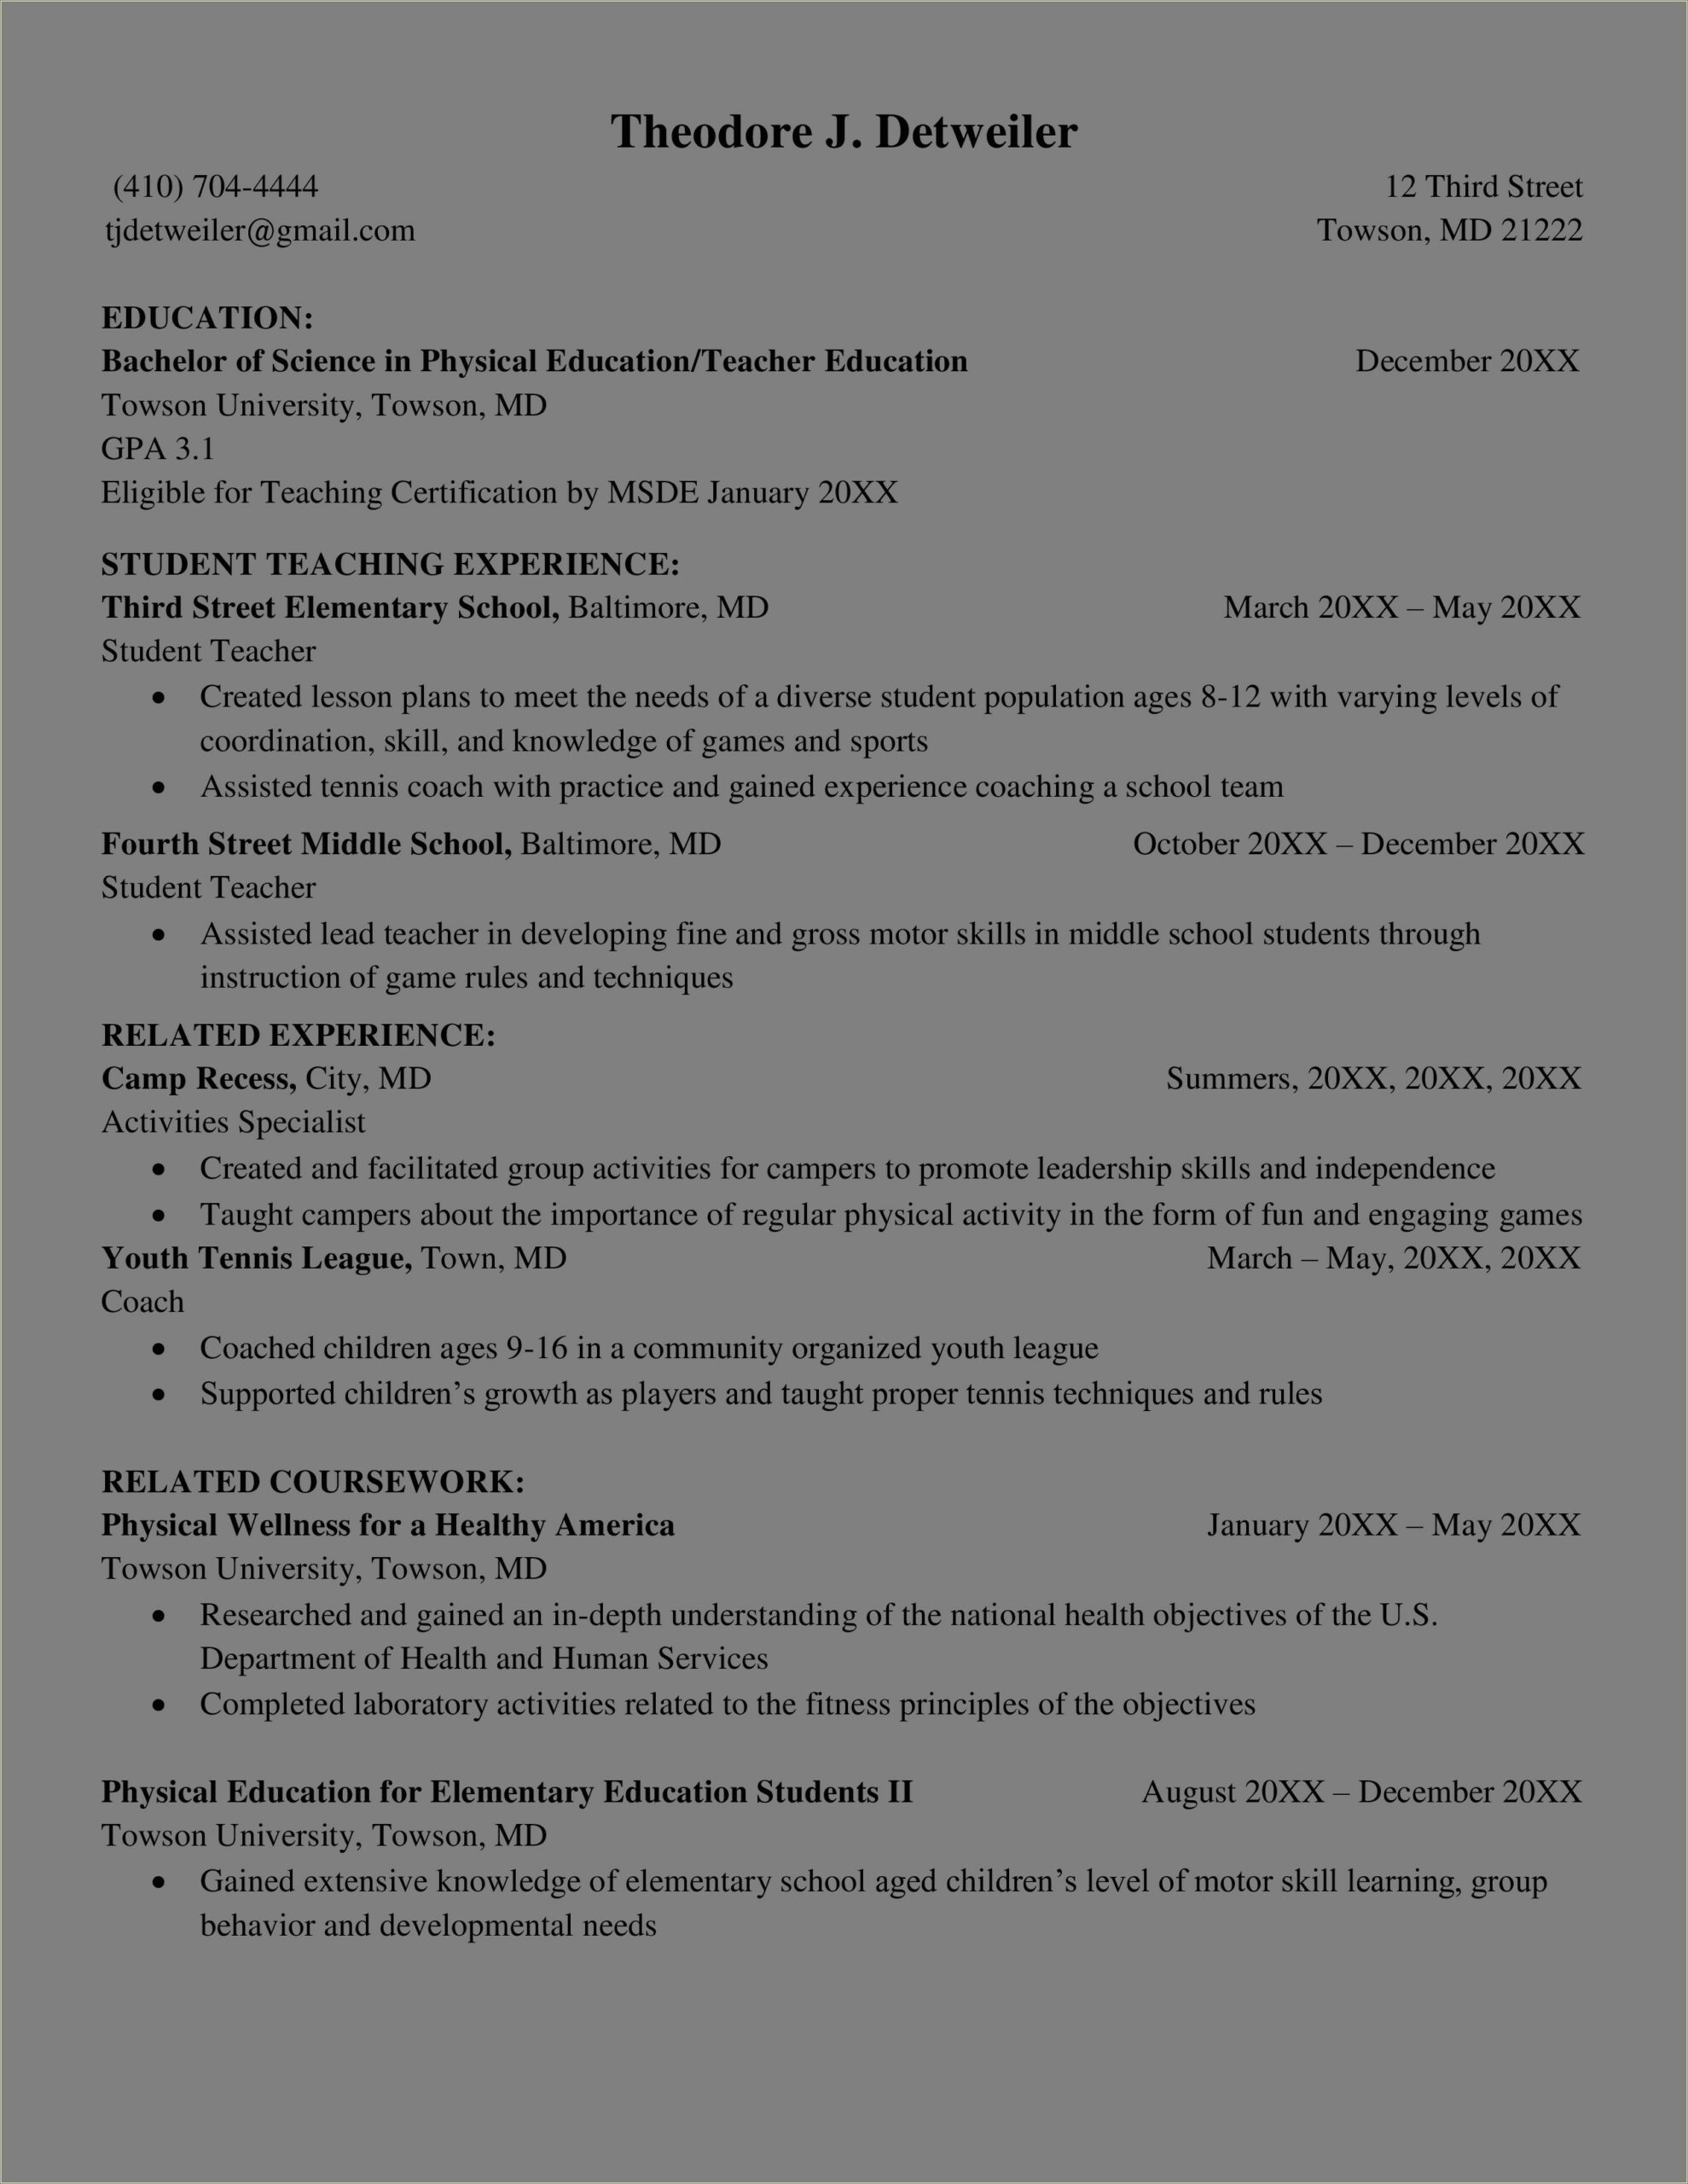 Physical Skills A Teacher Should Have For Resume